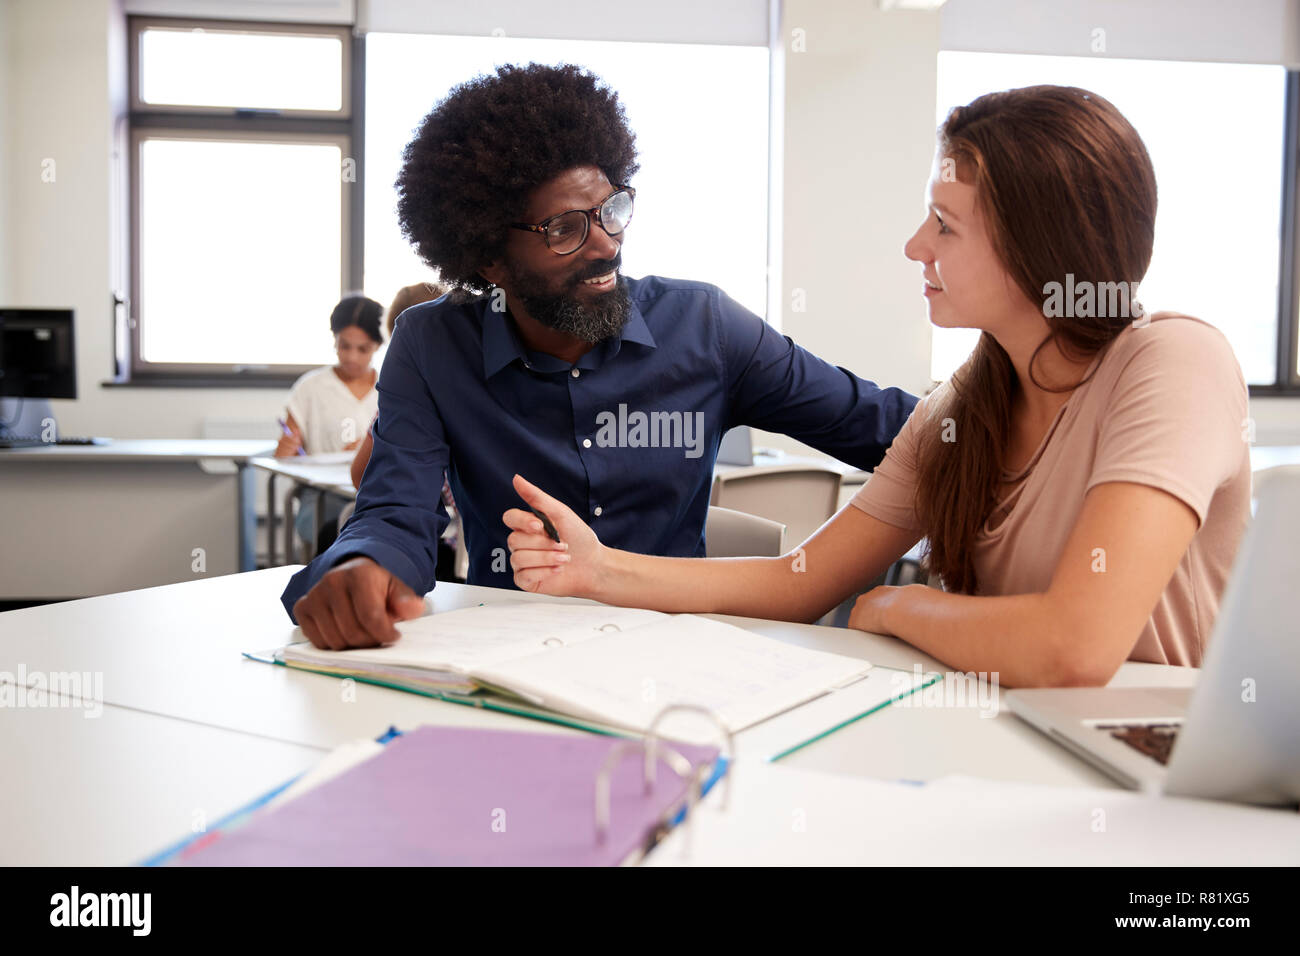 High School Tutor Giving Female Student One To One Tuition At Desk  In Classroom Stock Photo